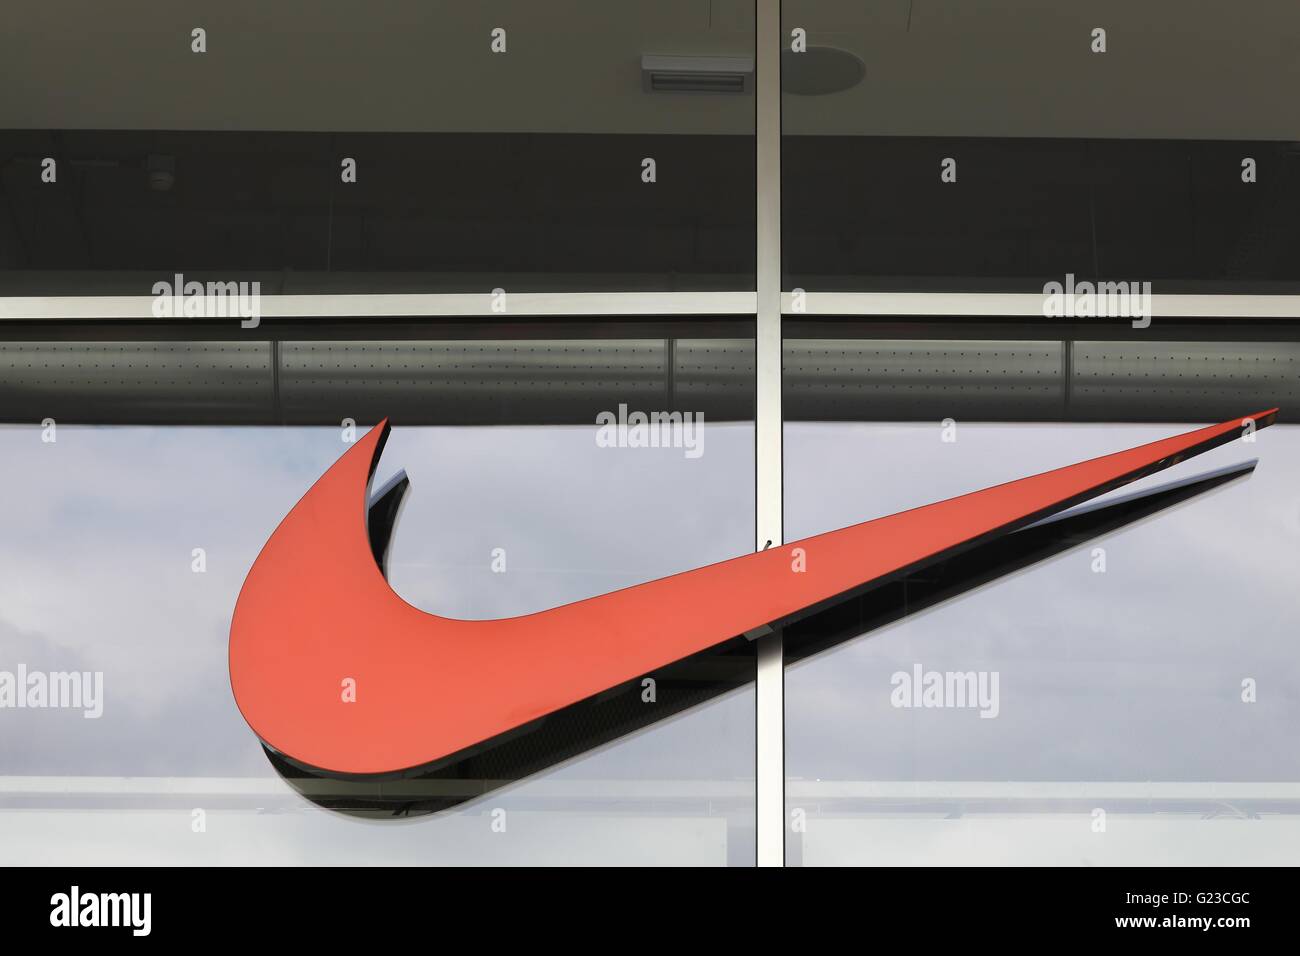 nike store sign